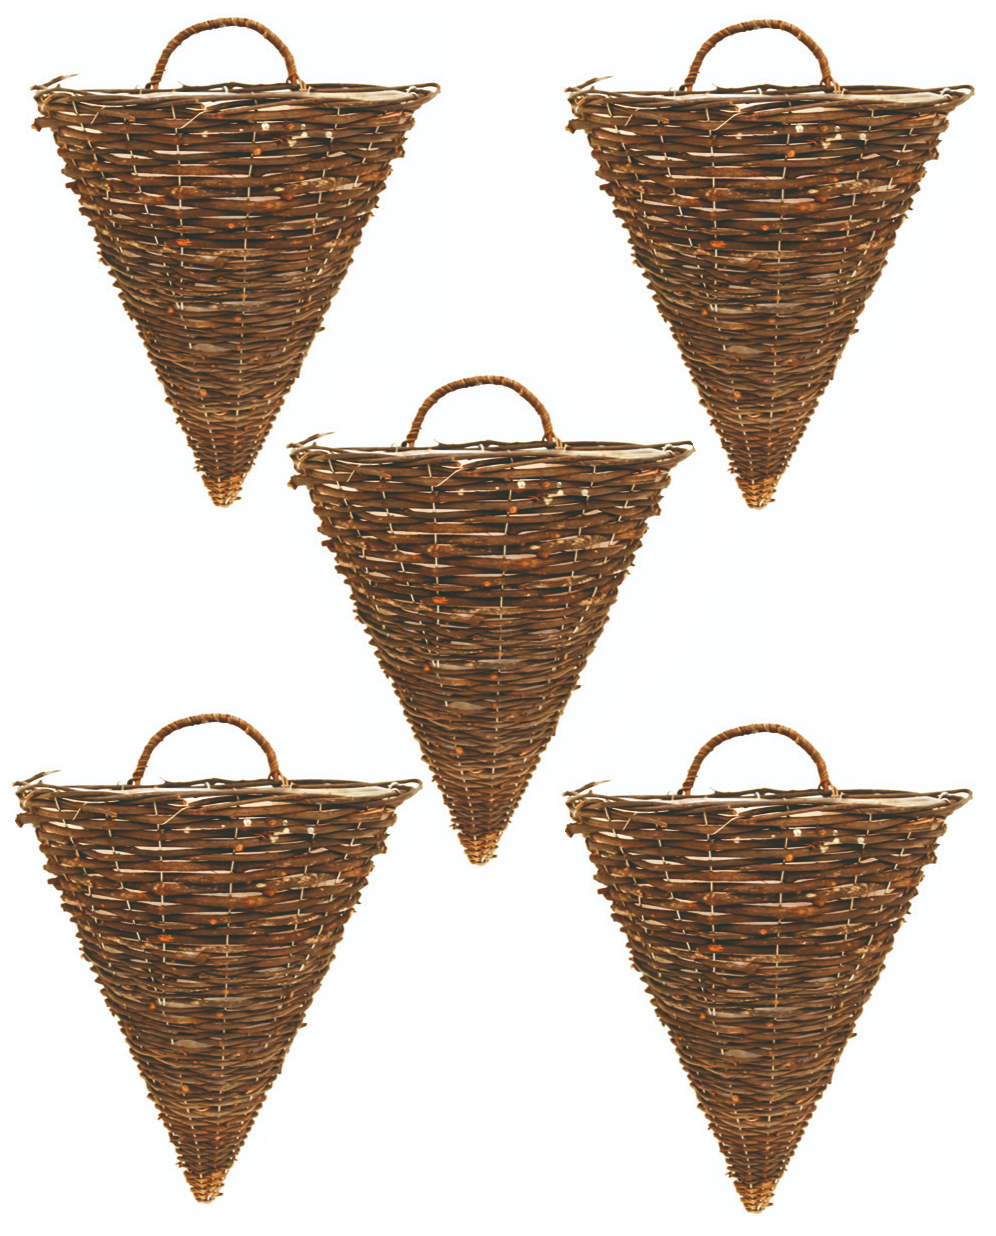 5X 30cm Dark Brown Wicker Wall Hanging Cone Basket Lined Rattan Willow Planter